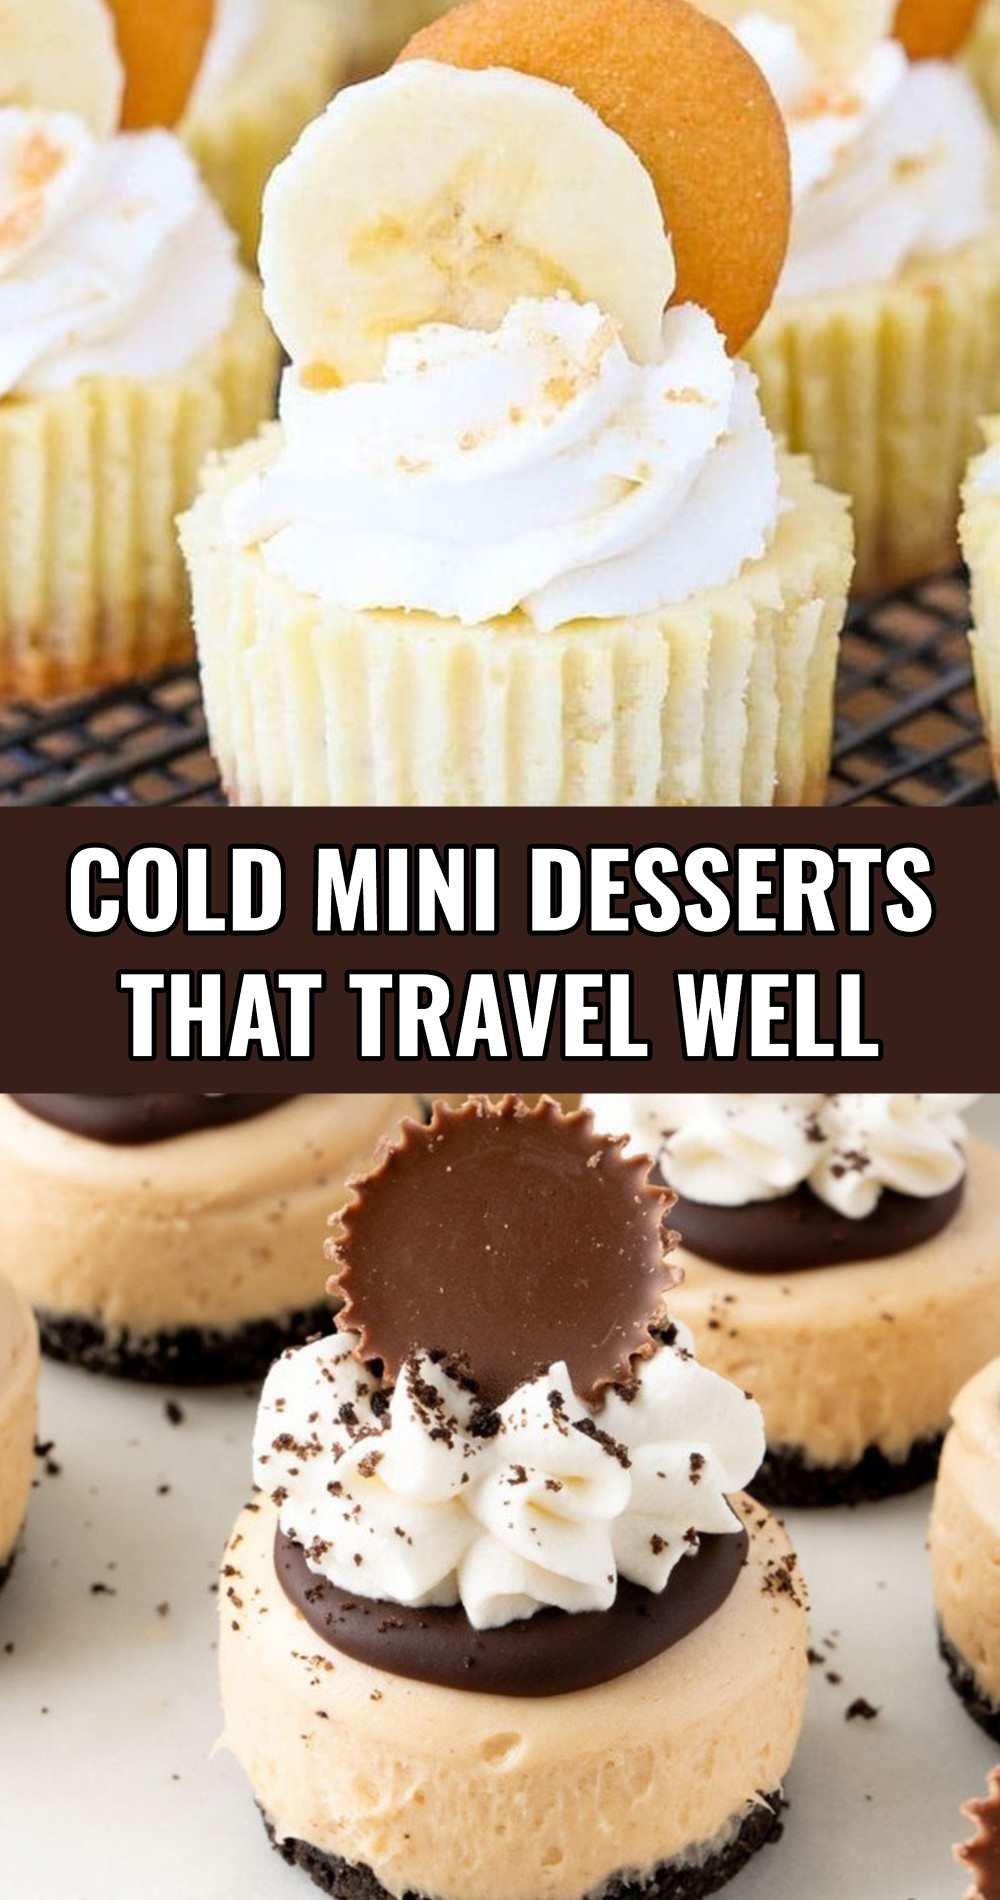 Cold mini desserts that travel well